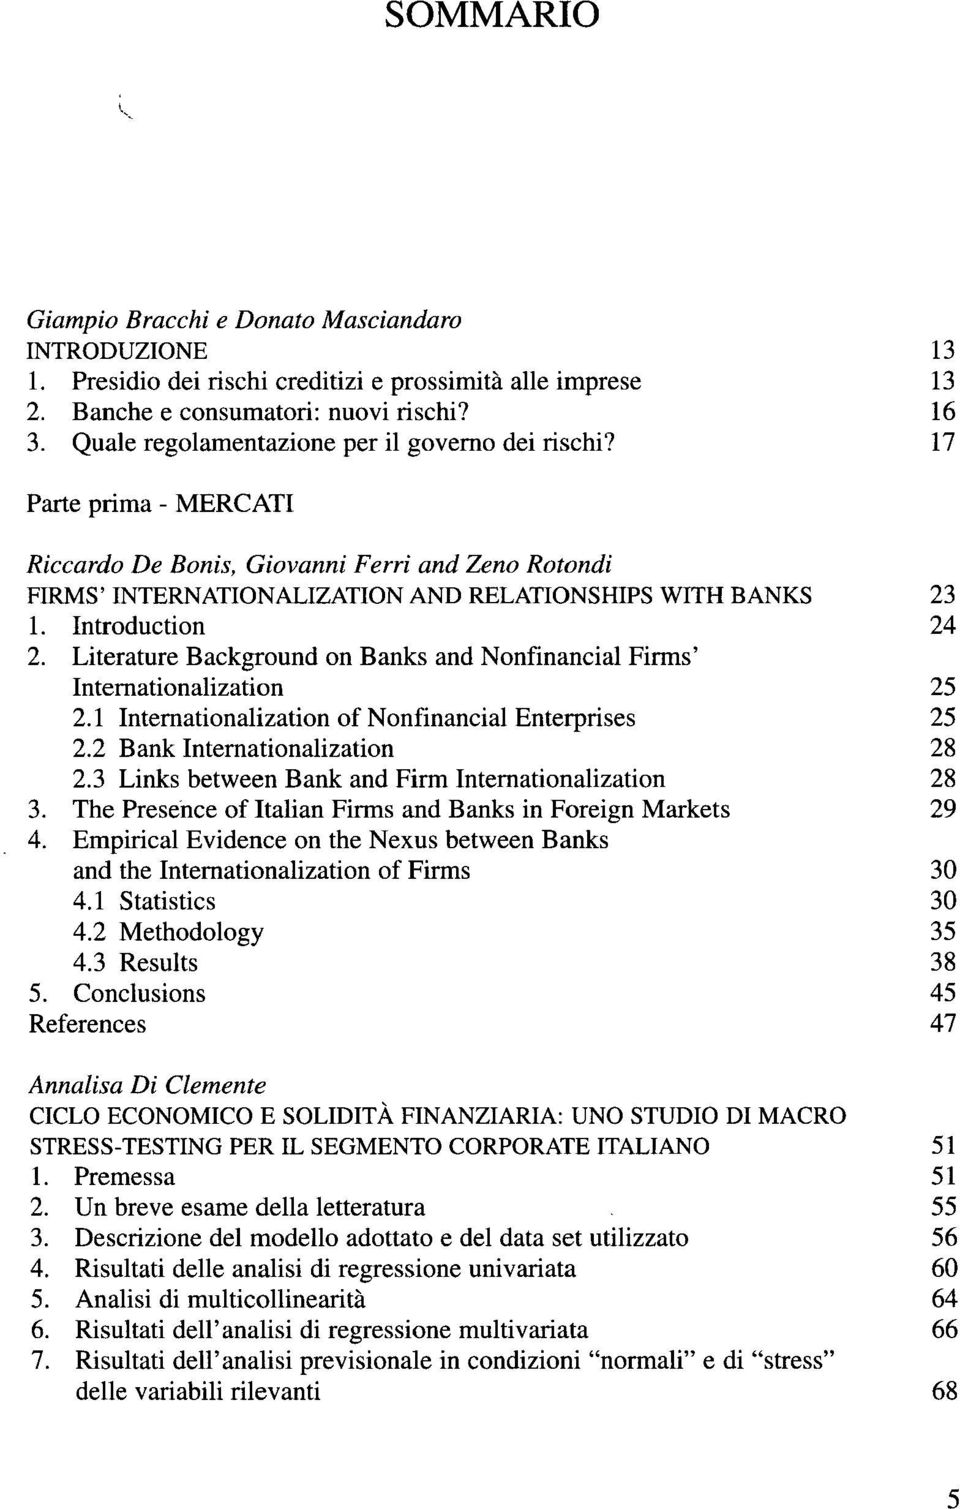 Introduction 24 2. Literature Background on Banks and Nonfinancial Firms' Internationalization 25 2.1 Internationalization of Nonfinancial Enterprises 25 2.2 Bank Internationalization 28 2.